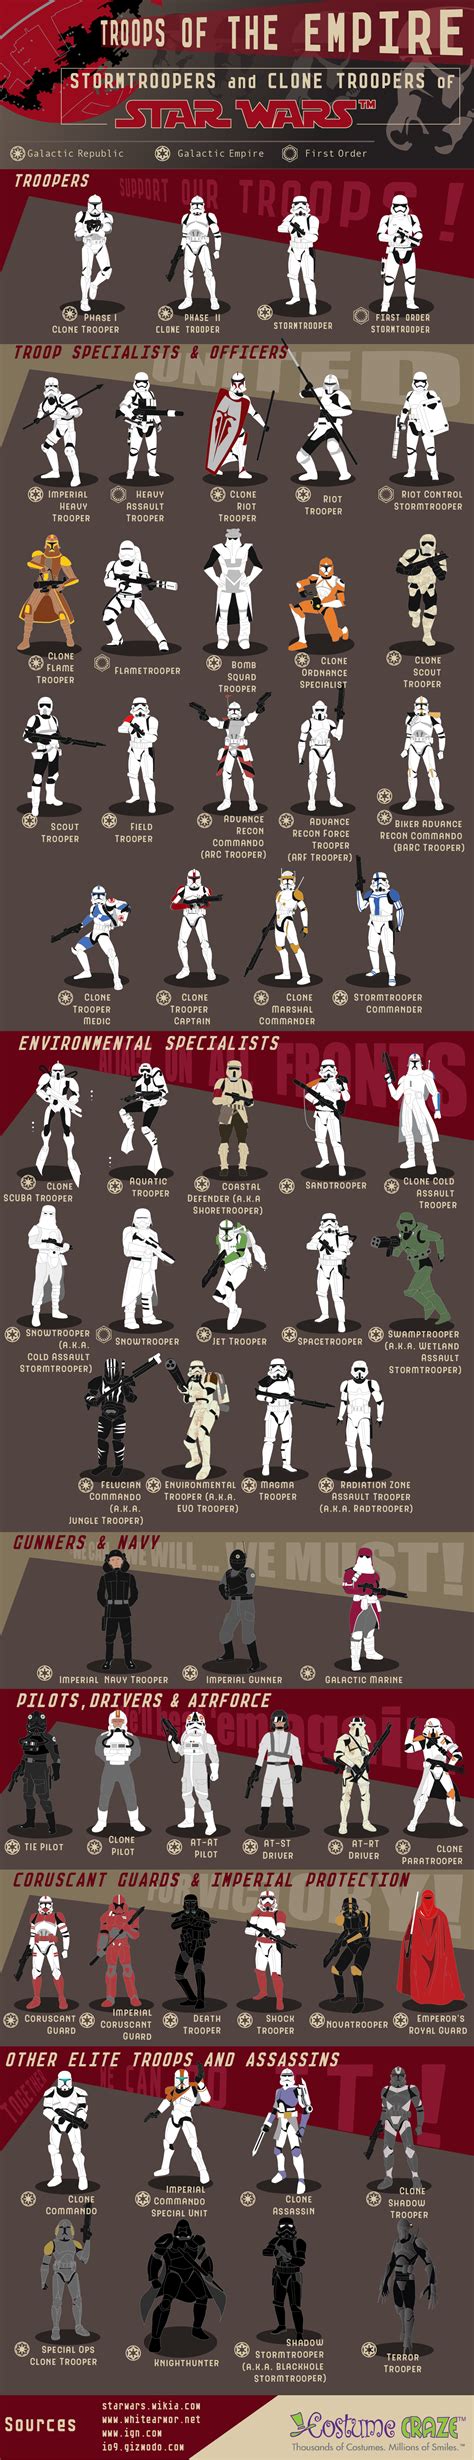 Infographic Troops Of The Empire Stormtroopers And Clone Troopers Of